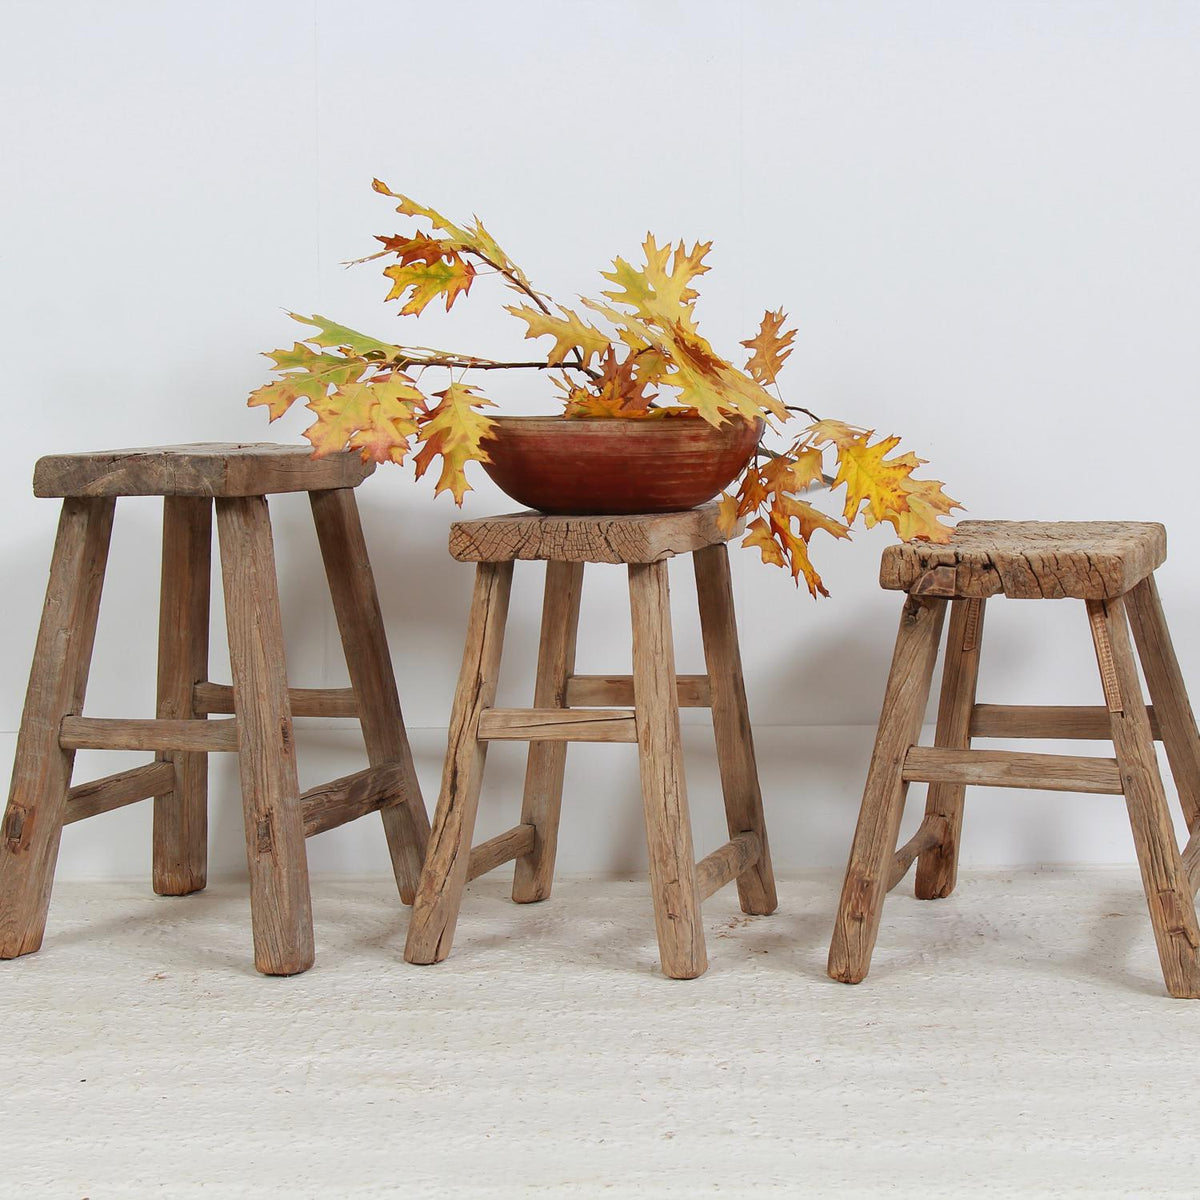 THREE RUSTIC CHINESE WORKERS STOOLS or Tables